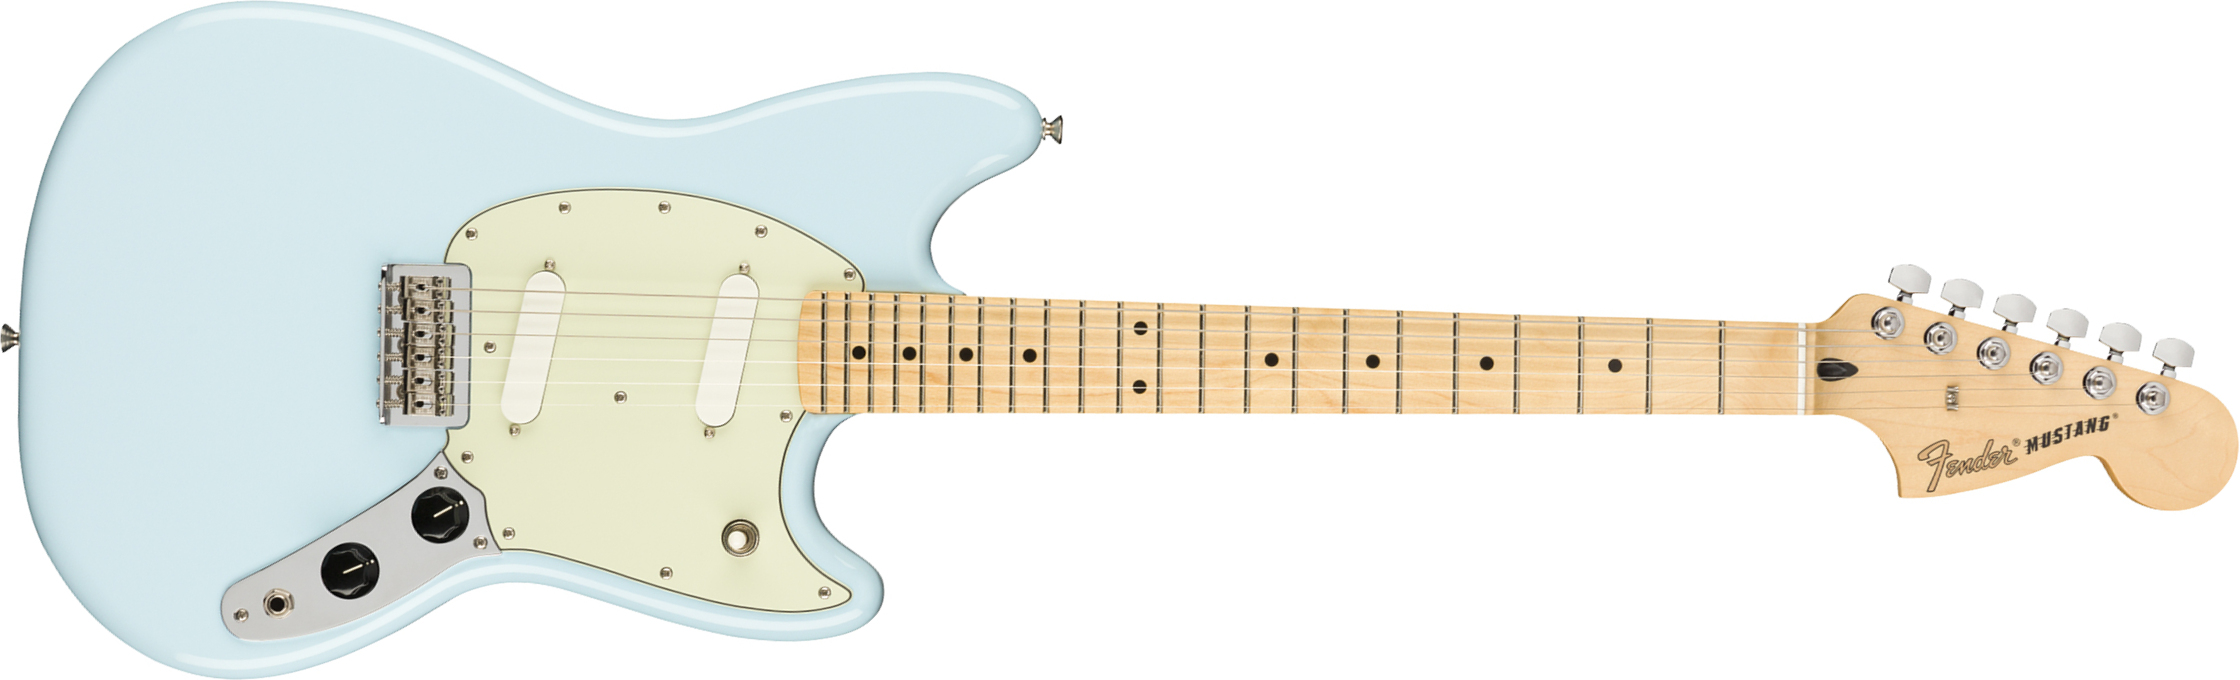 Fender Mustang Player Mex Ht Ss Mn - Surf Blue - Guitarra electrica retro rock - Main picture